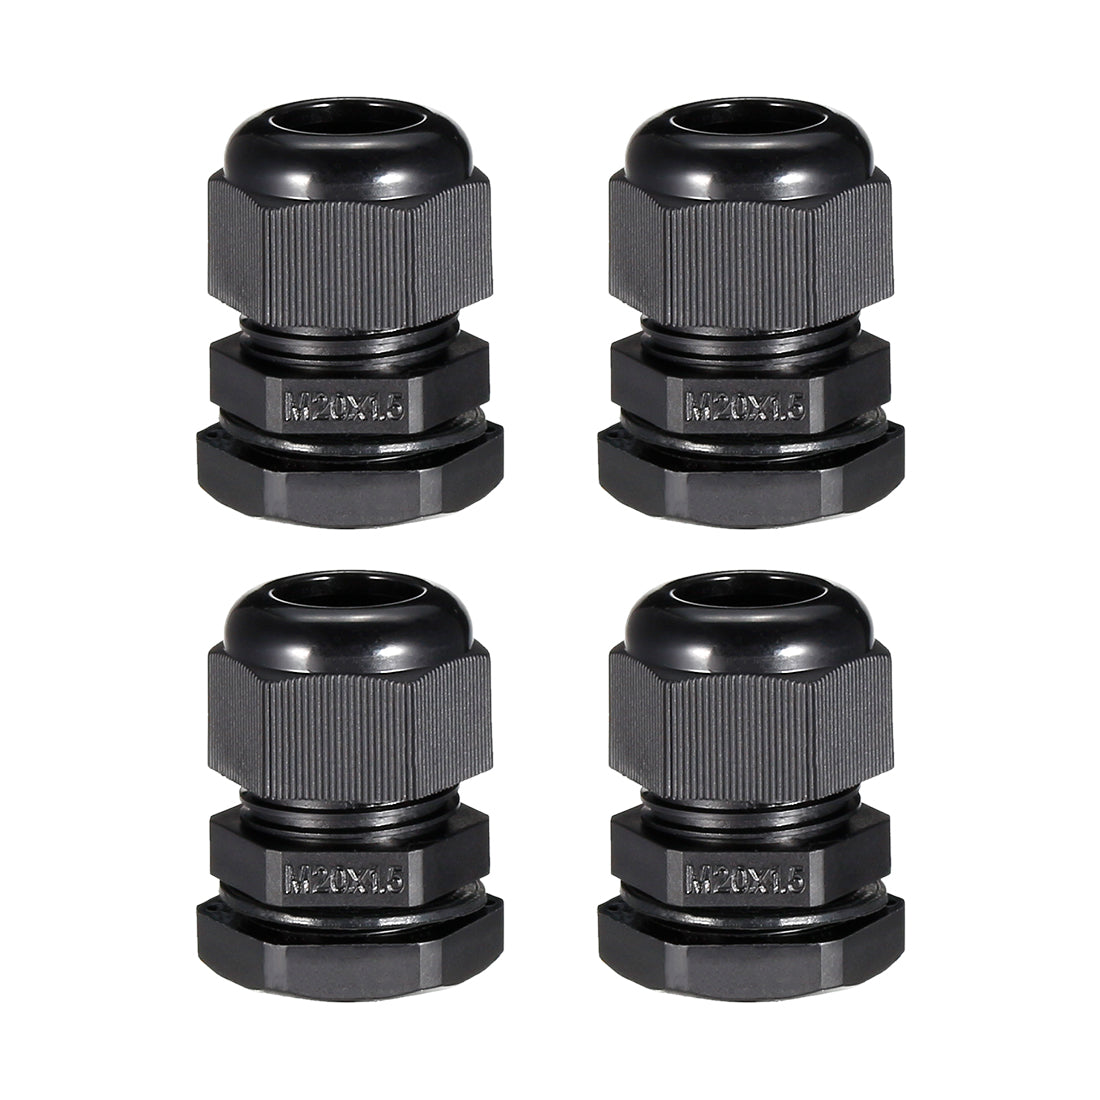 uxcell Uxcell 4Pcs M20 Cable Gland Waterproof Connector Plastic Wire Glands Joints Black for 6-12mm Dia Wires